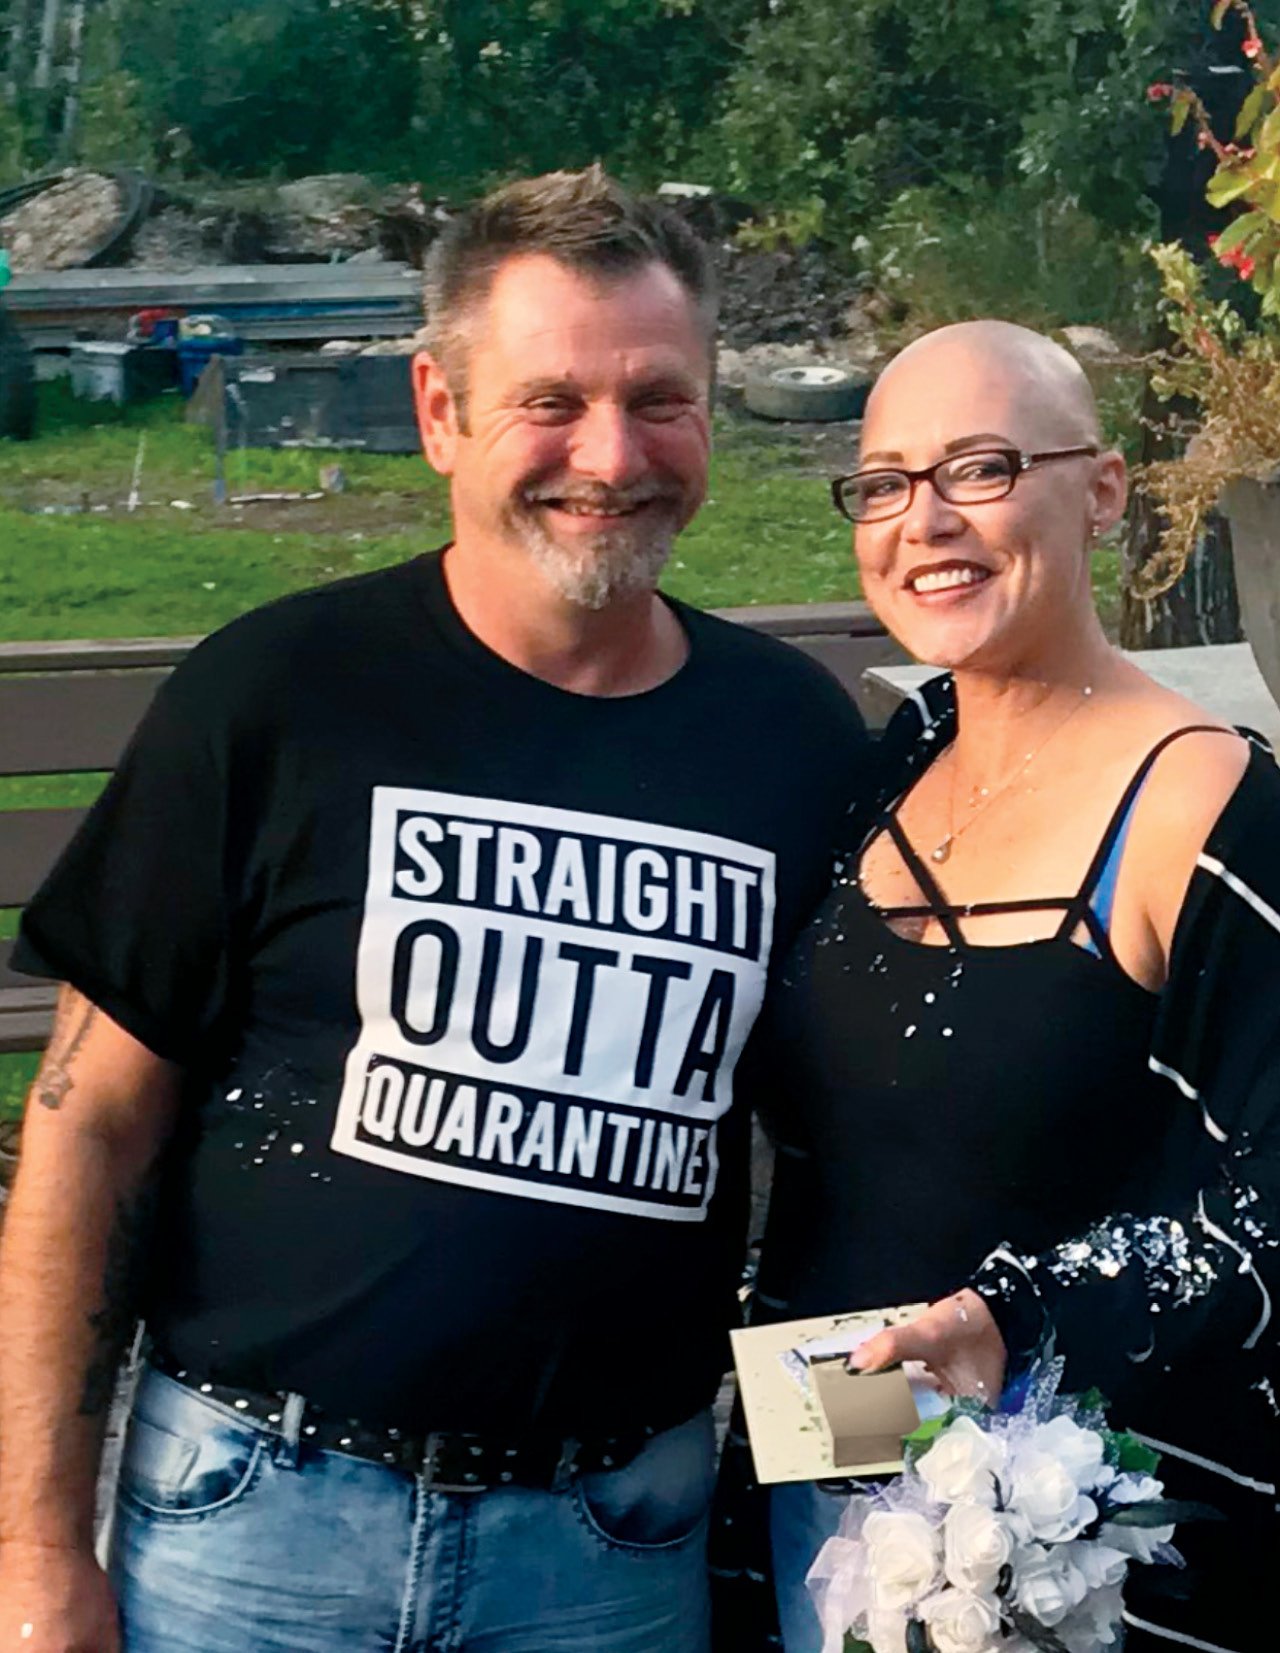 A photo of a middle-aged man wearing a T-shirt that says Straight Outta Quarantine and a woman in a black tank top